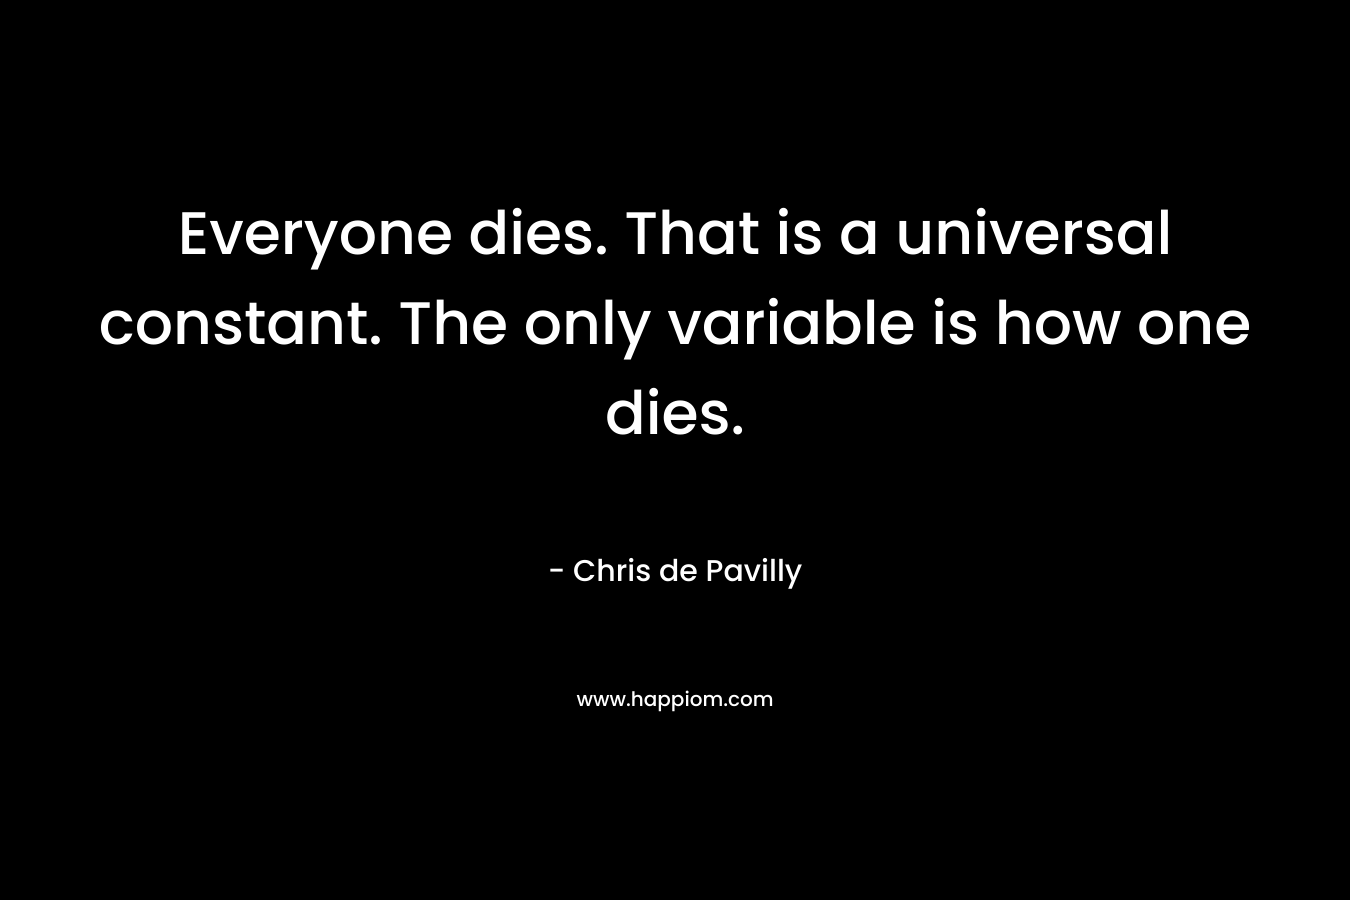 Everyone dies. That is a universal constant. The only variable is how one dies. – Chris de Pavilly